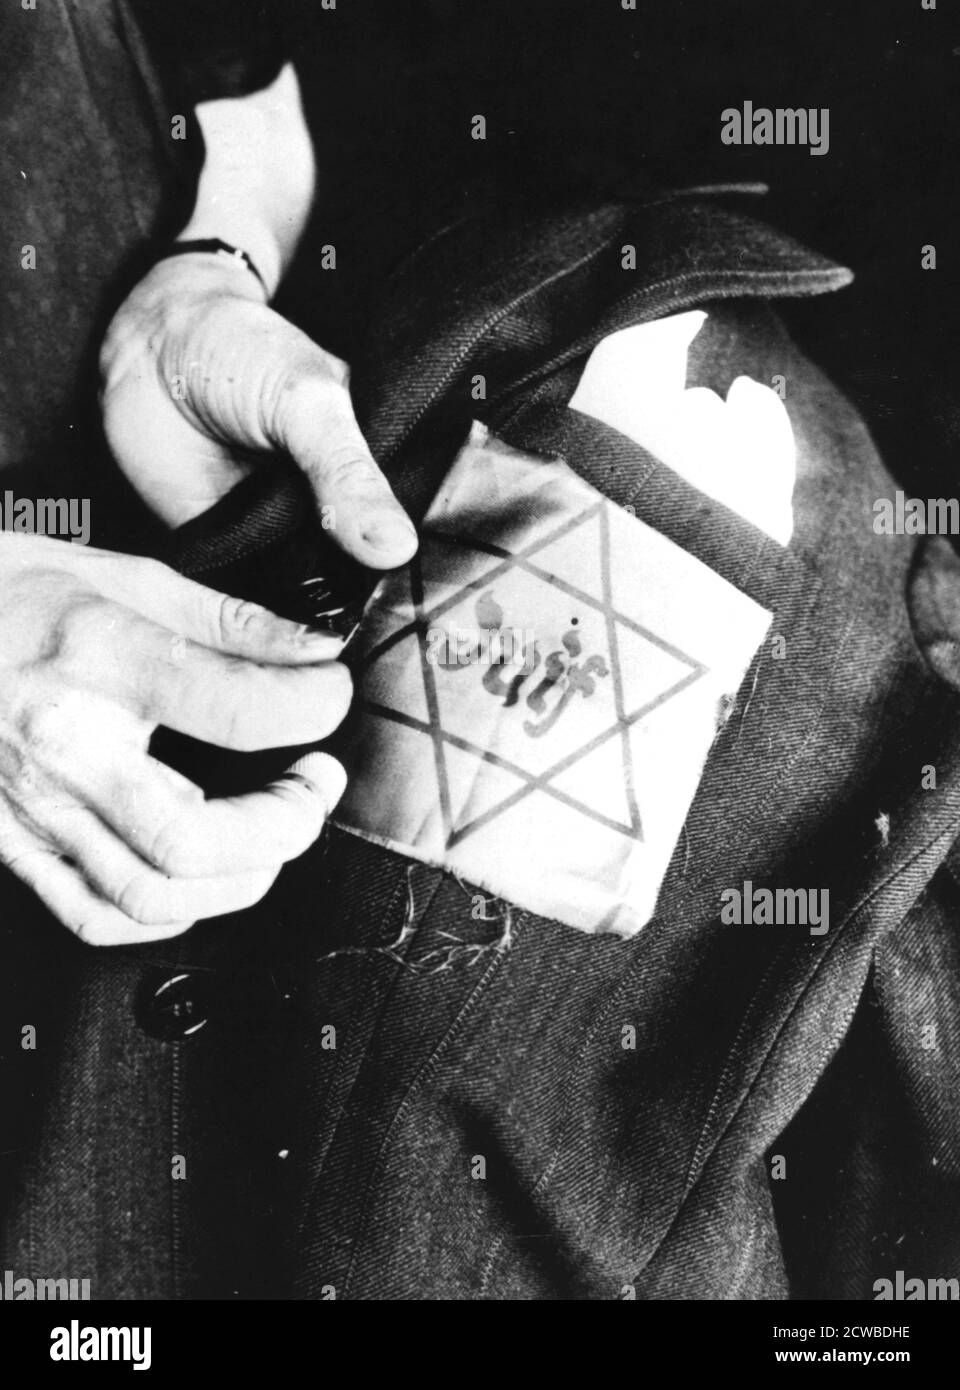 Sewing the yellow star identifying a Jew onto a jacket, German-occupied Paris, 1942. Life for French Jews was oppressive under Nazi occupation. Collaborators in both the occupied part of the country and the area controlled by the Vichy regime co-operated enthusiastically in the persecution. The Jewish population were compelled to wear the yellow star on their clothing from 1941. In 1942-1944; 76,000 Jews were deported to concentration camps. Only 2500 survived. The photographer is unknown. Stock Photo